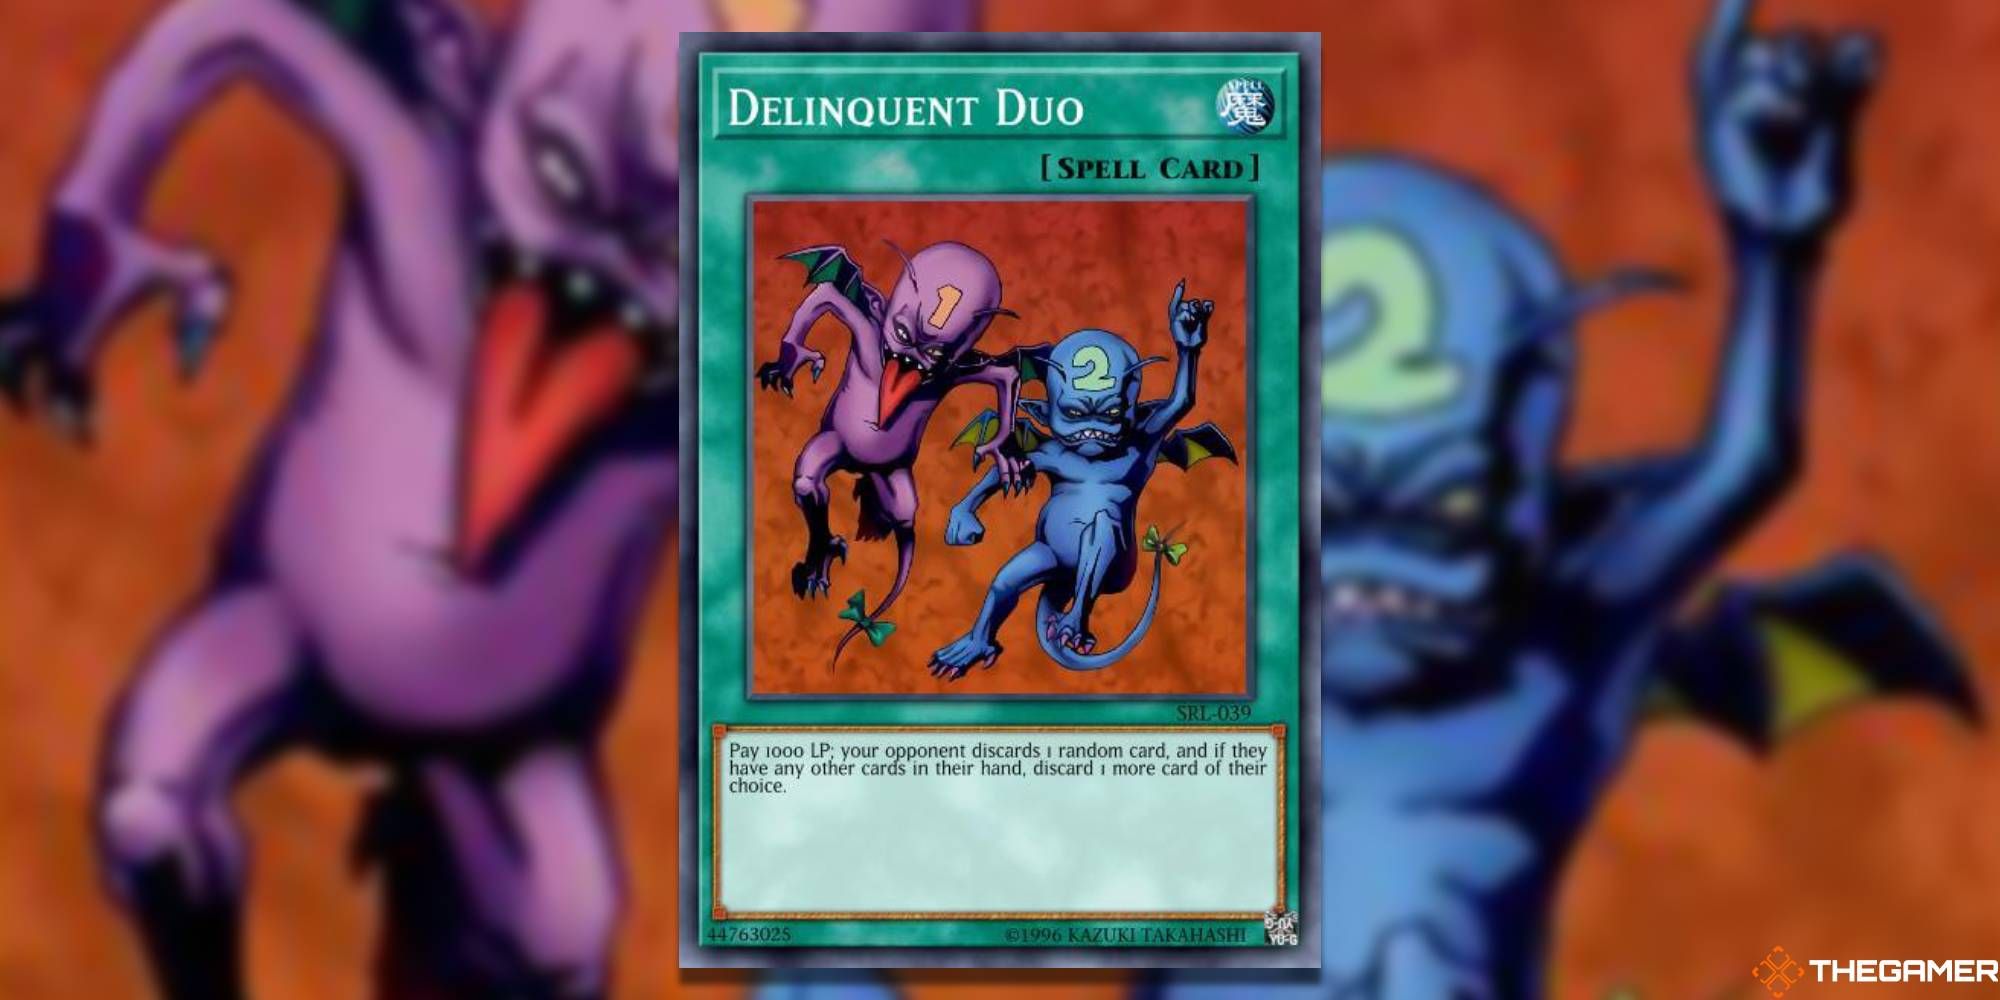 The delinquent duo from Yu-Gi-Oh Spell Ruler